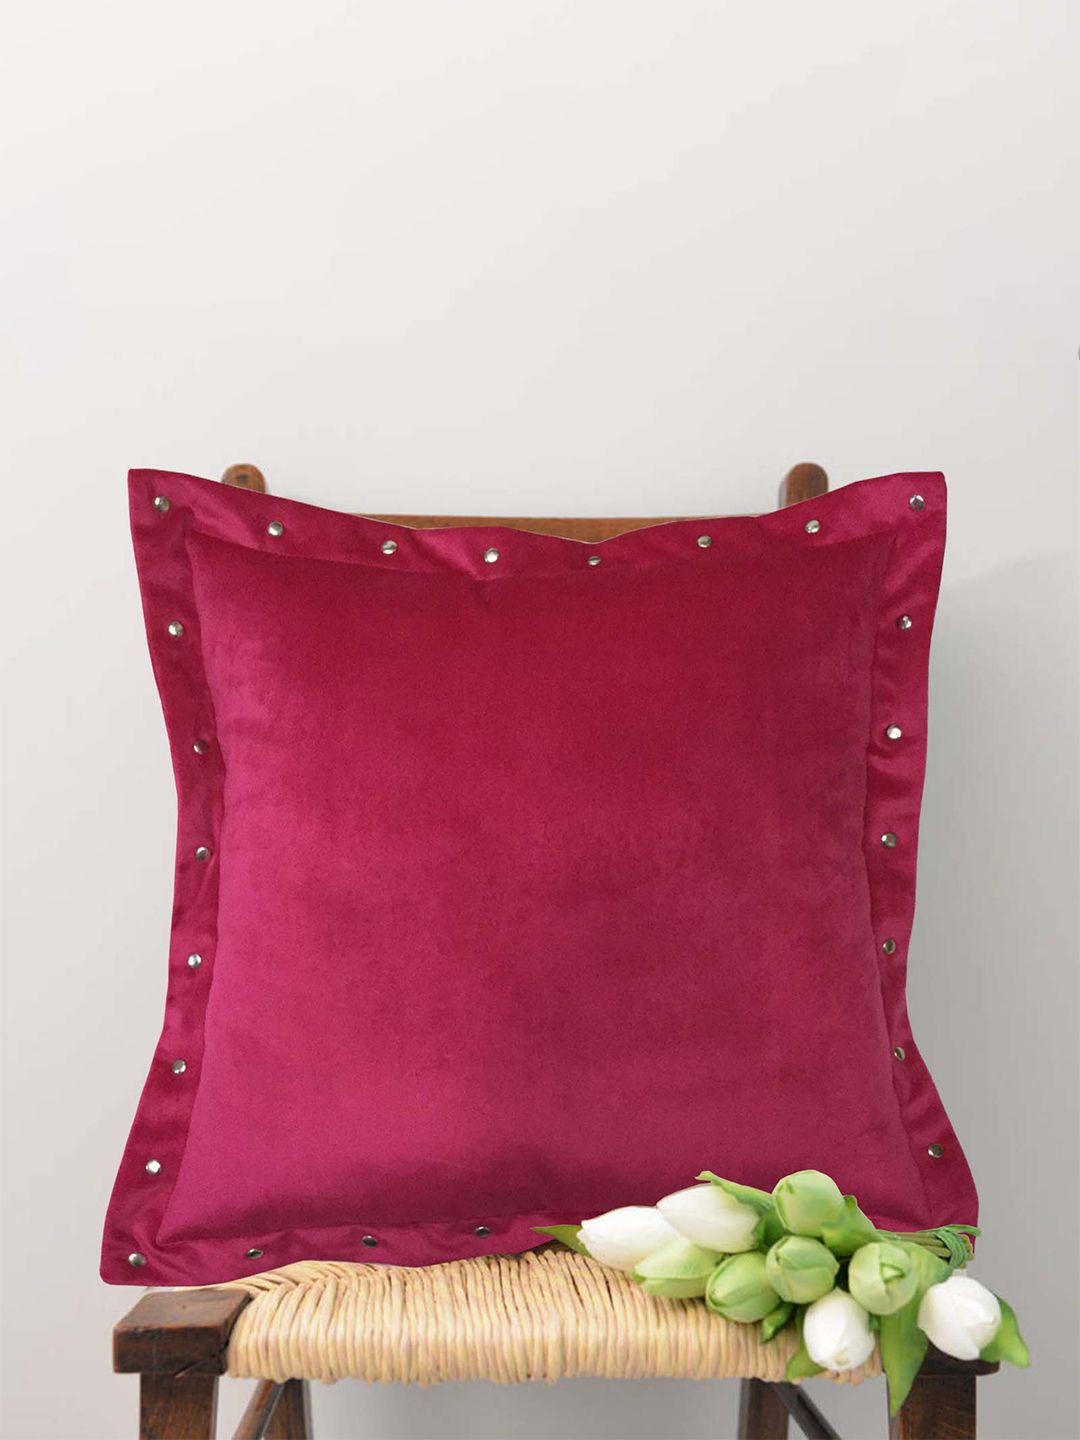 Lushomes Pink Velvet Square Cushion Covers Price in India